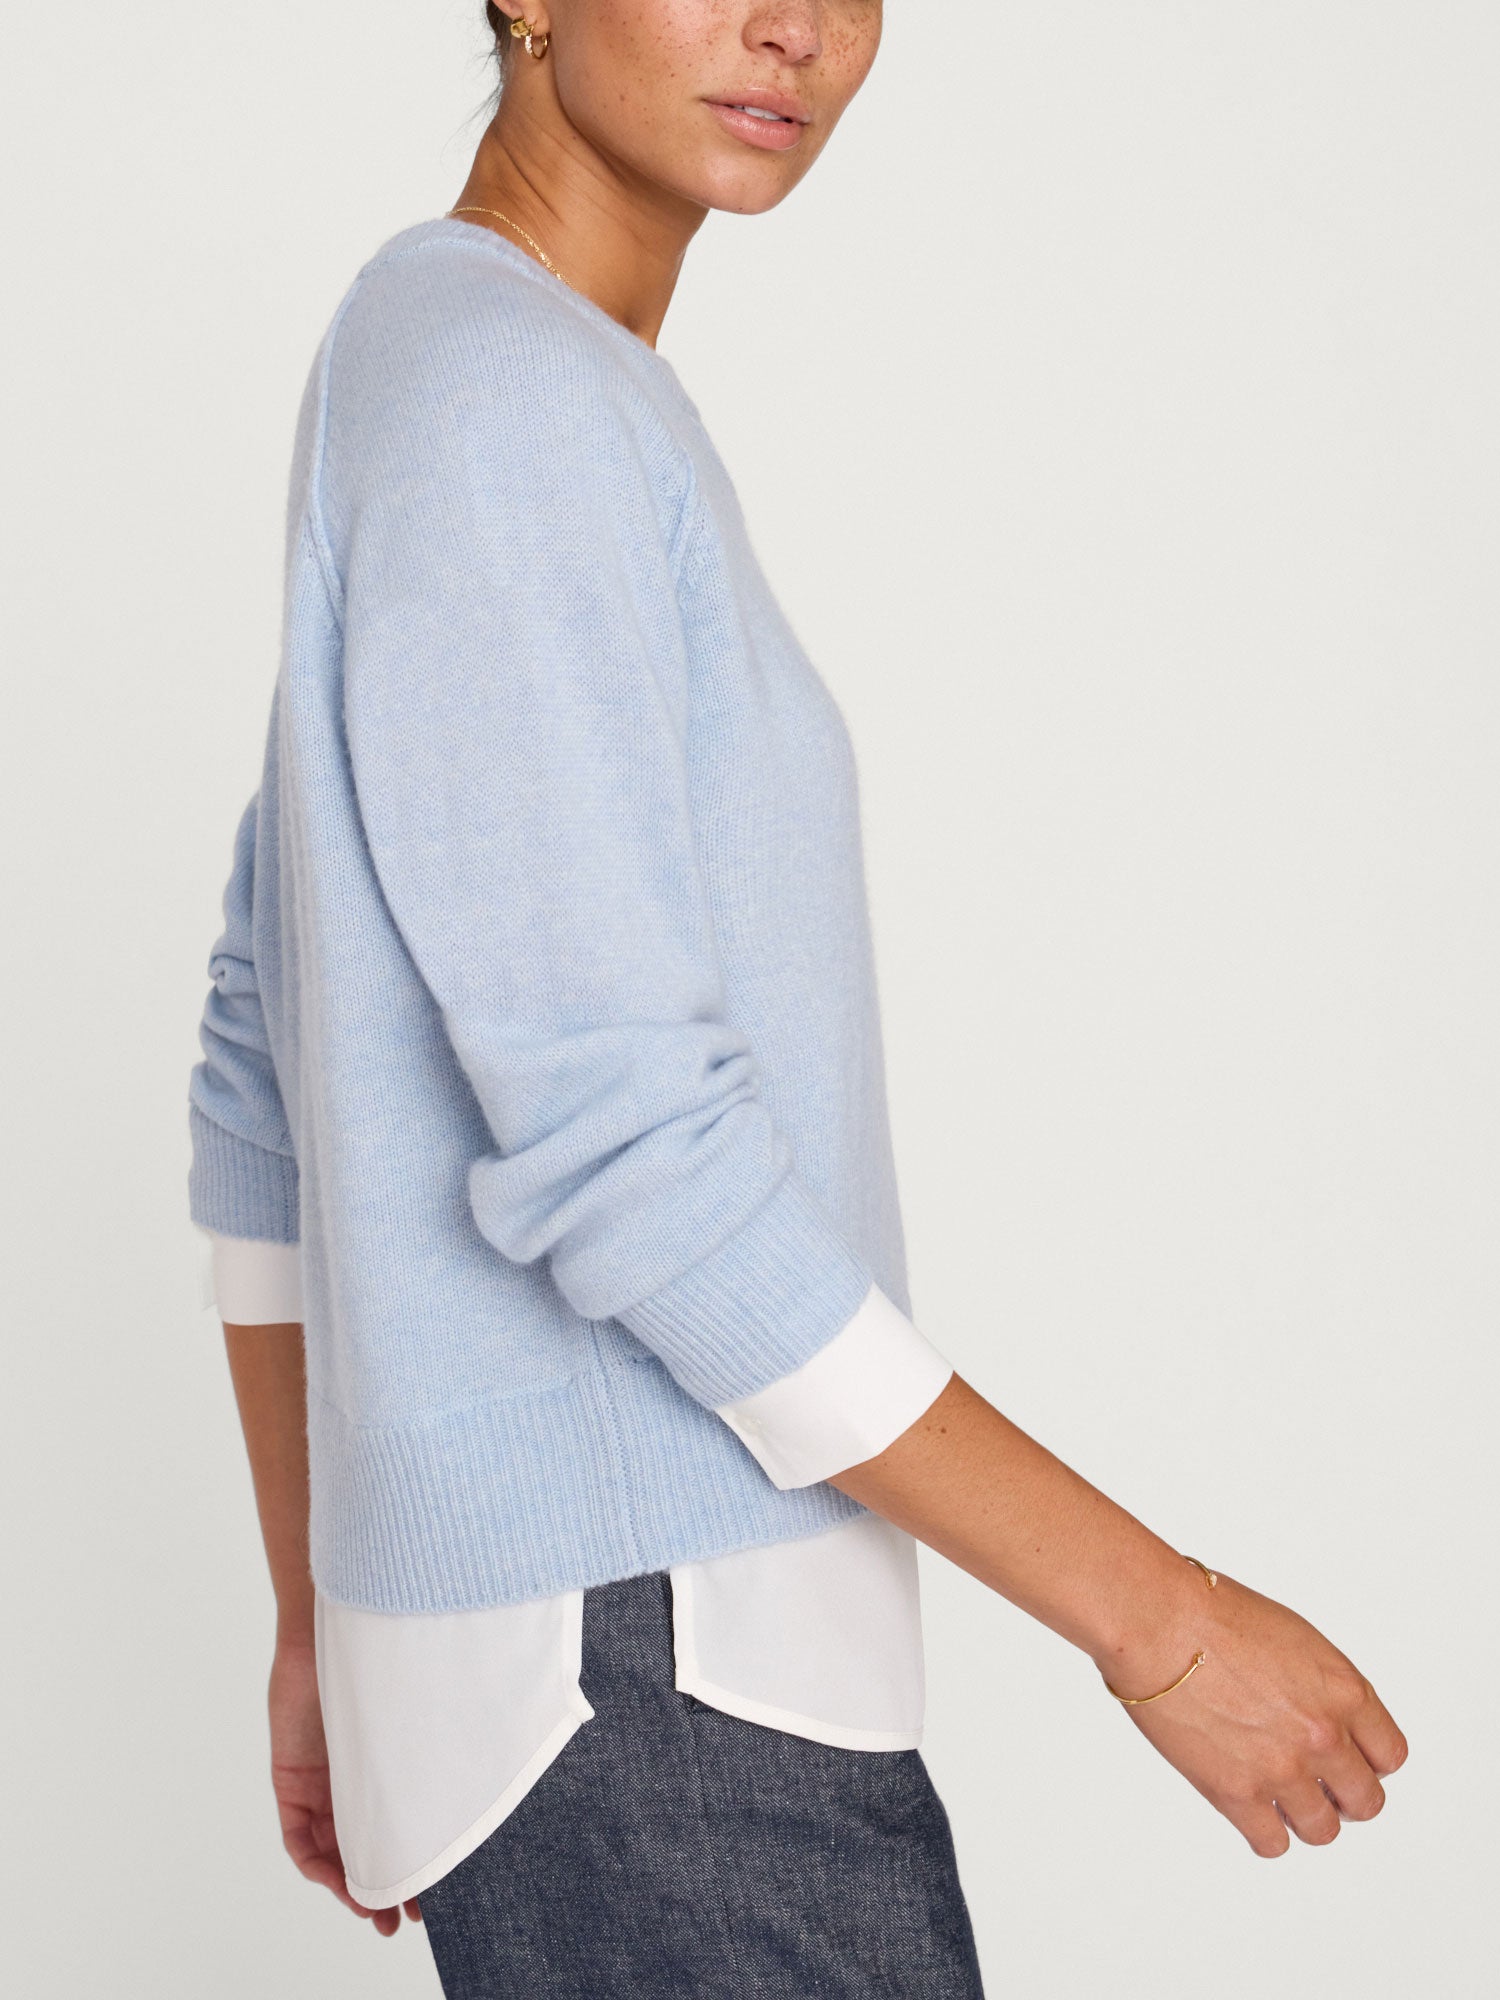 Looker Layered crewneck light blue sweater side view